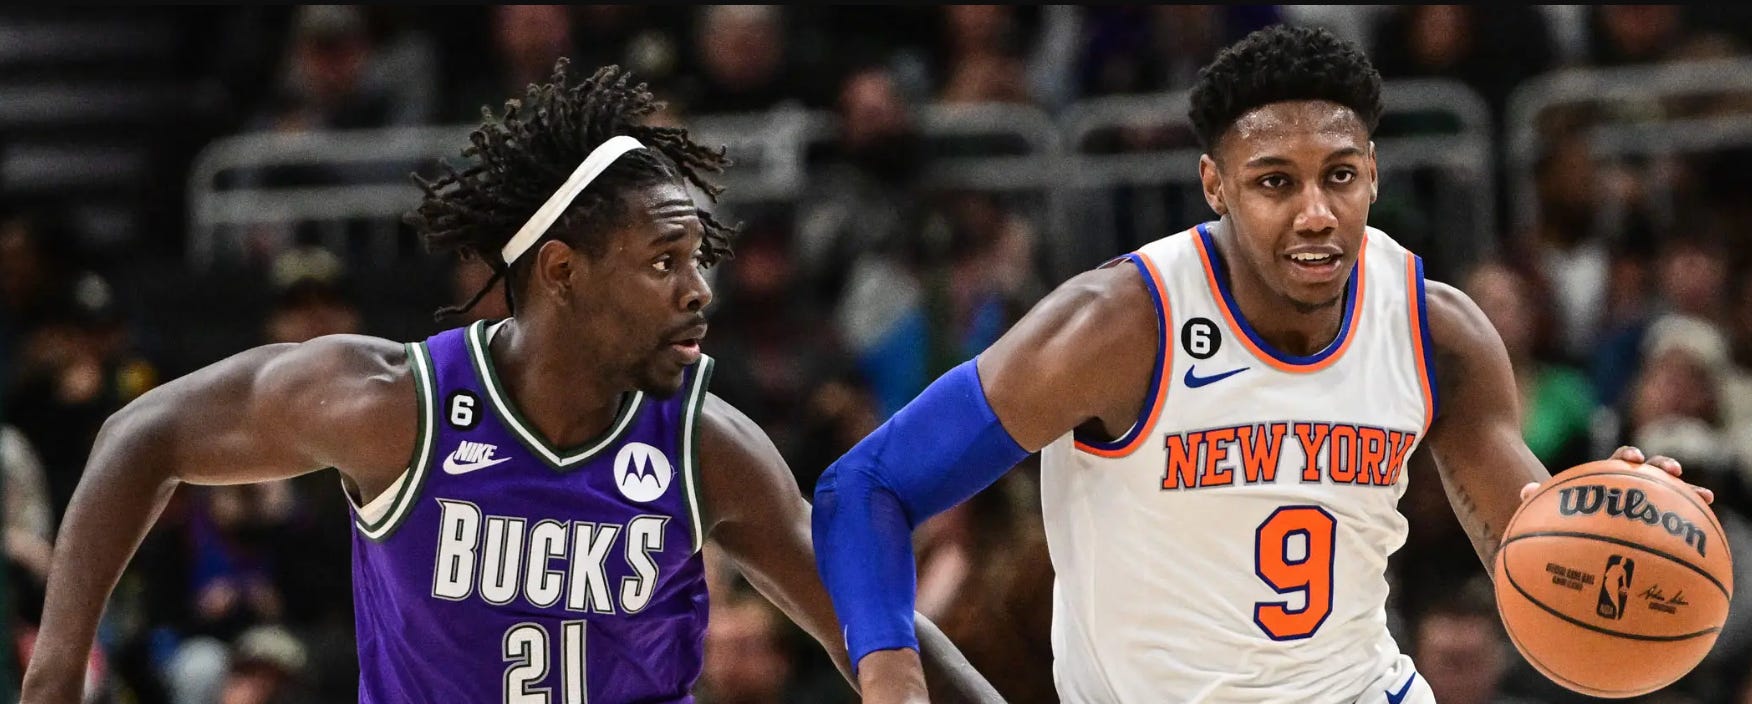 REPORT: Josh Hart likely to re-sign with Knicks, RJ Barrett